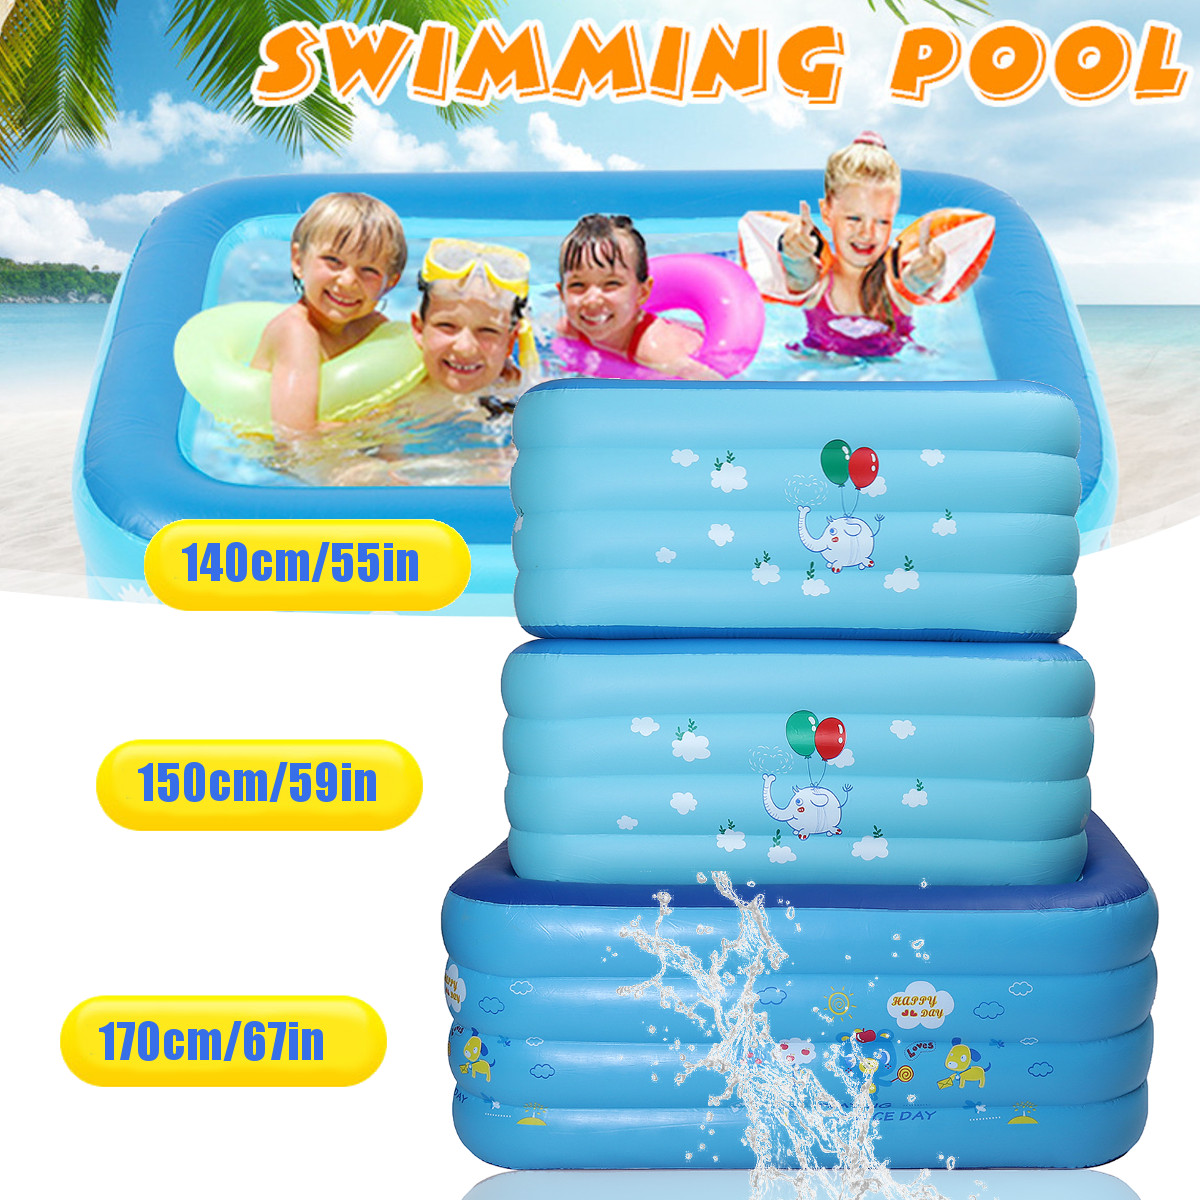 Full-Sized-Family-Inflatable-Swimming-Pool-Thickened-4-Ring-Inflatable-Lounge-Pool-Summer-Backyard-f-1696501-1